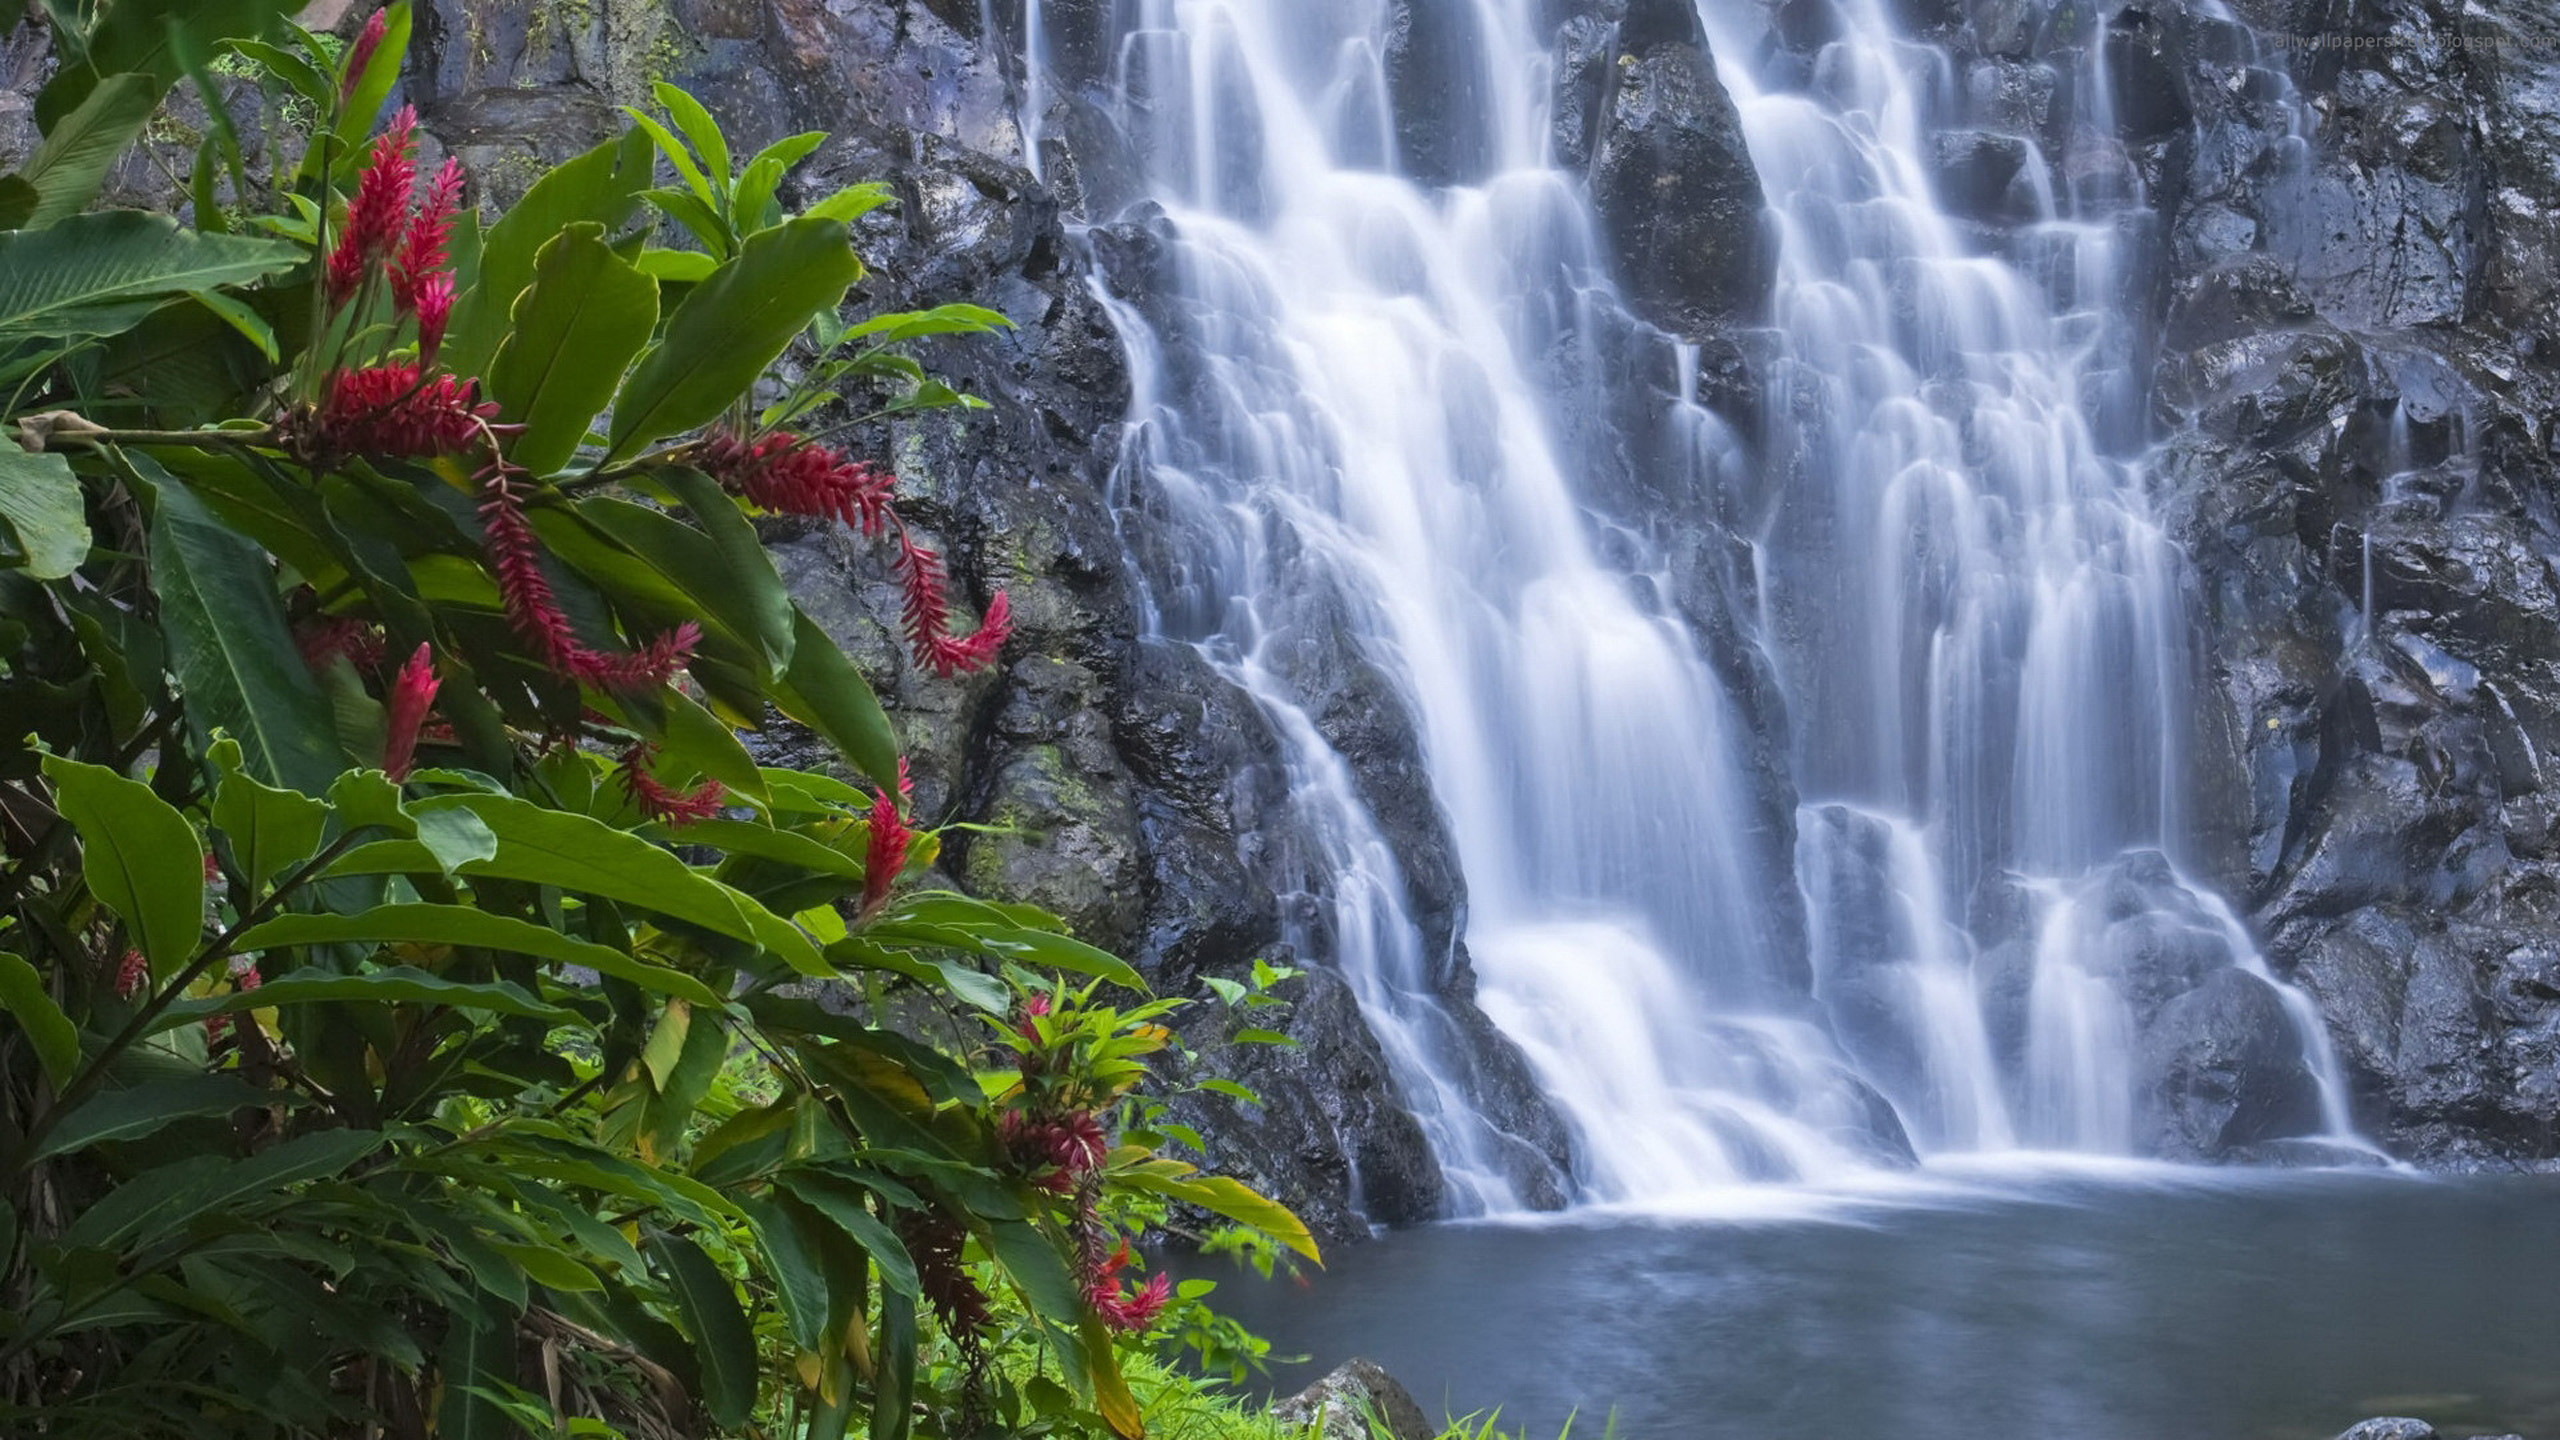 2560x1440 Images of Waterfalls Flowers - Yahoo Image Search Results